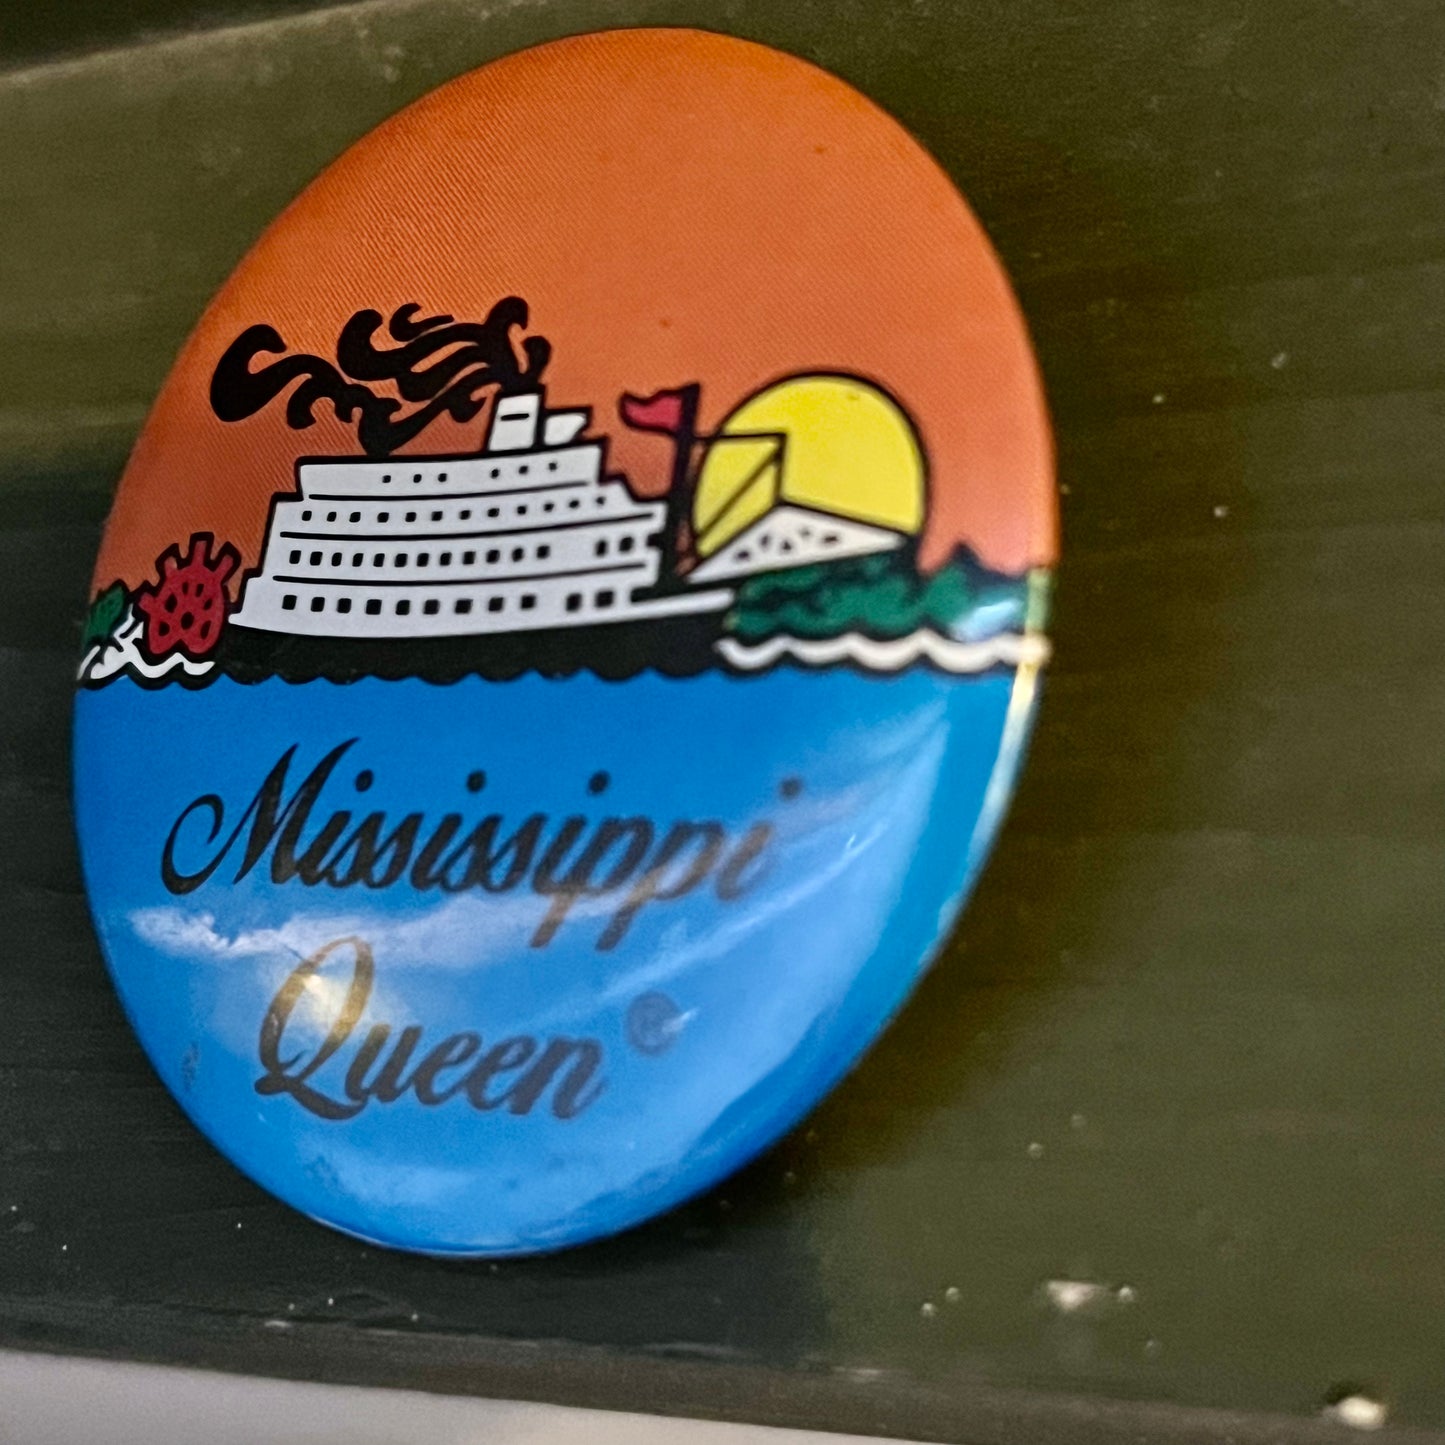 【USA vintage】缶バッジ　Mississippi Queen